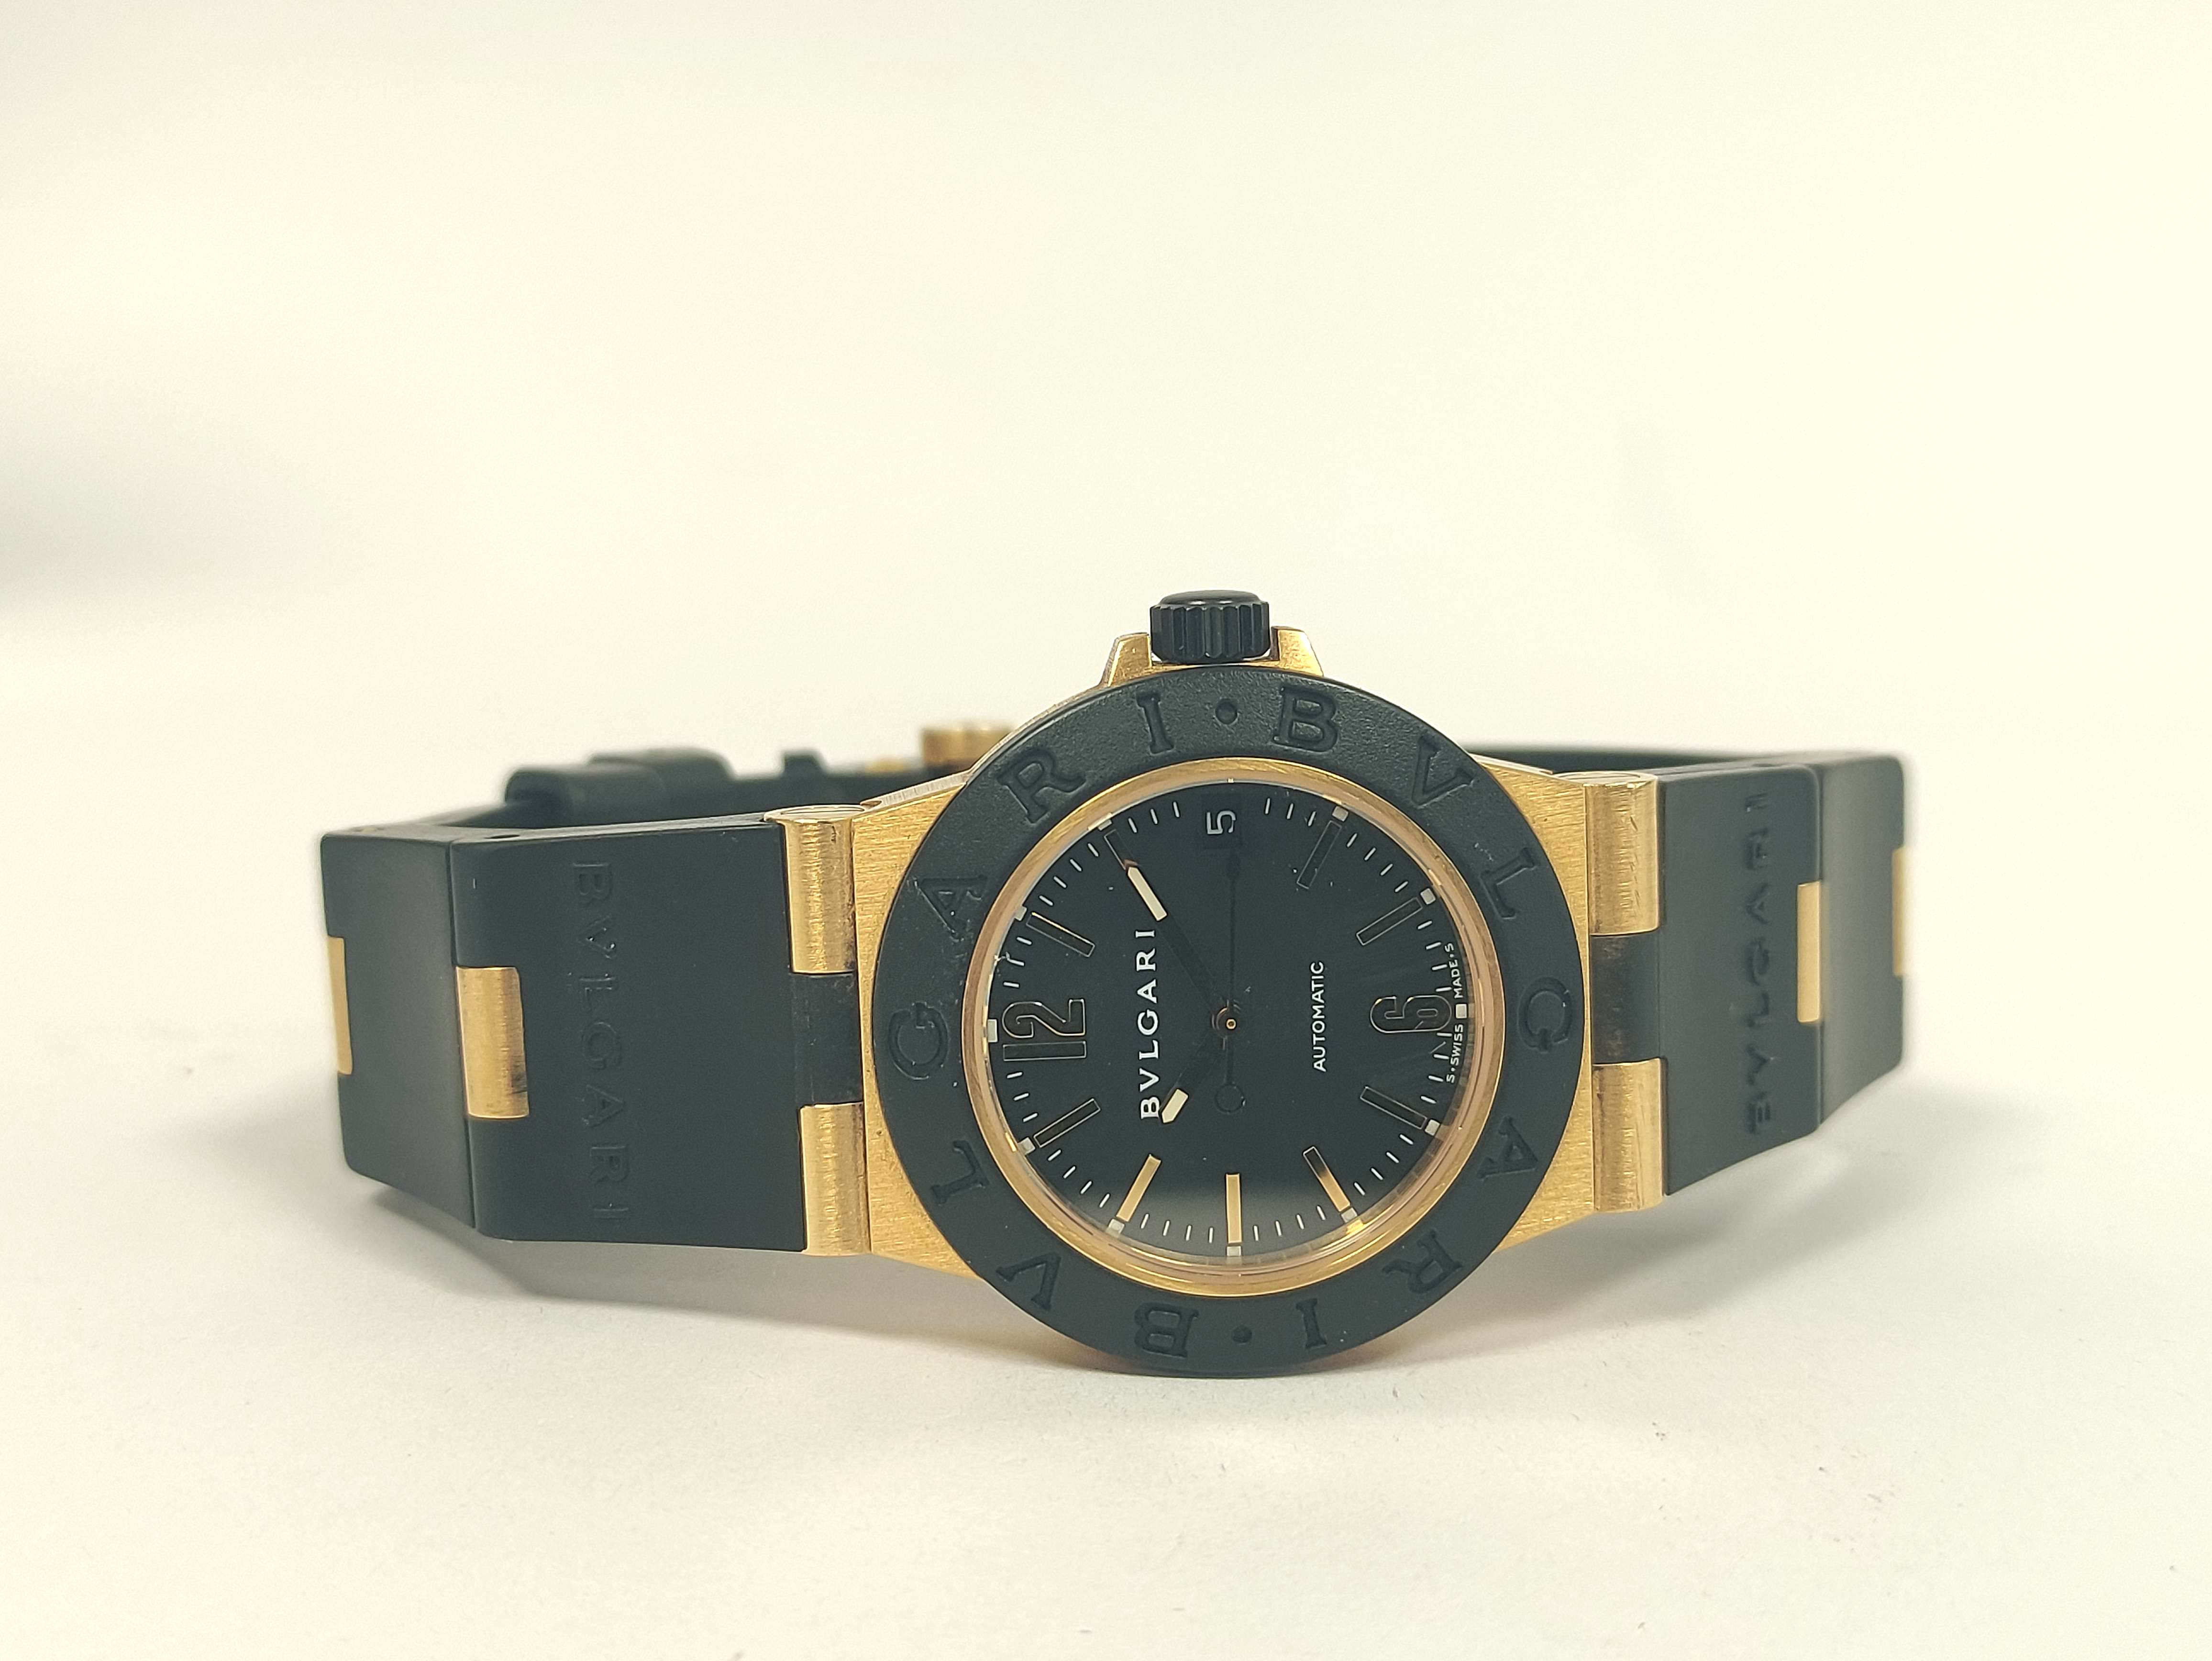 Bulgari AL32 automatic watch, 18ct gold and butyl, with receipt and other items, in box. - Image 2 of 8